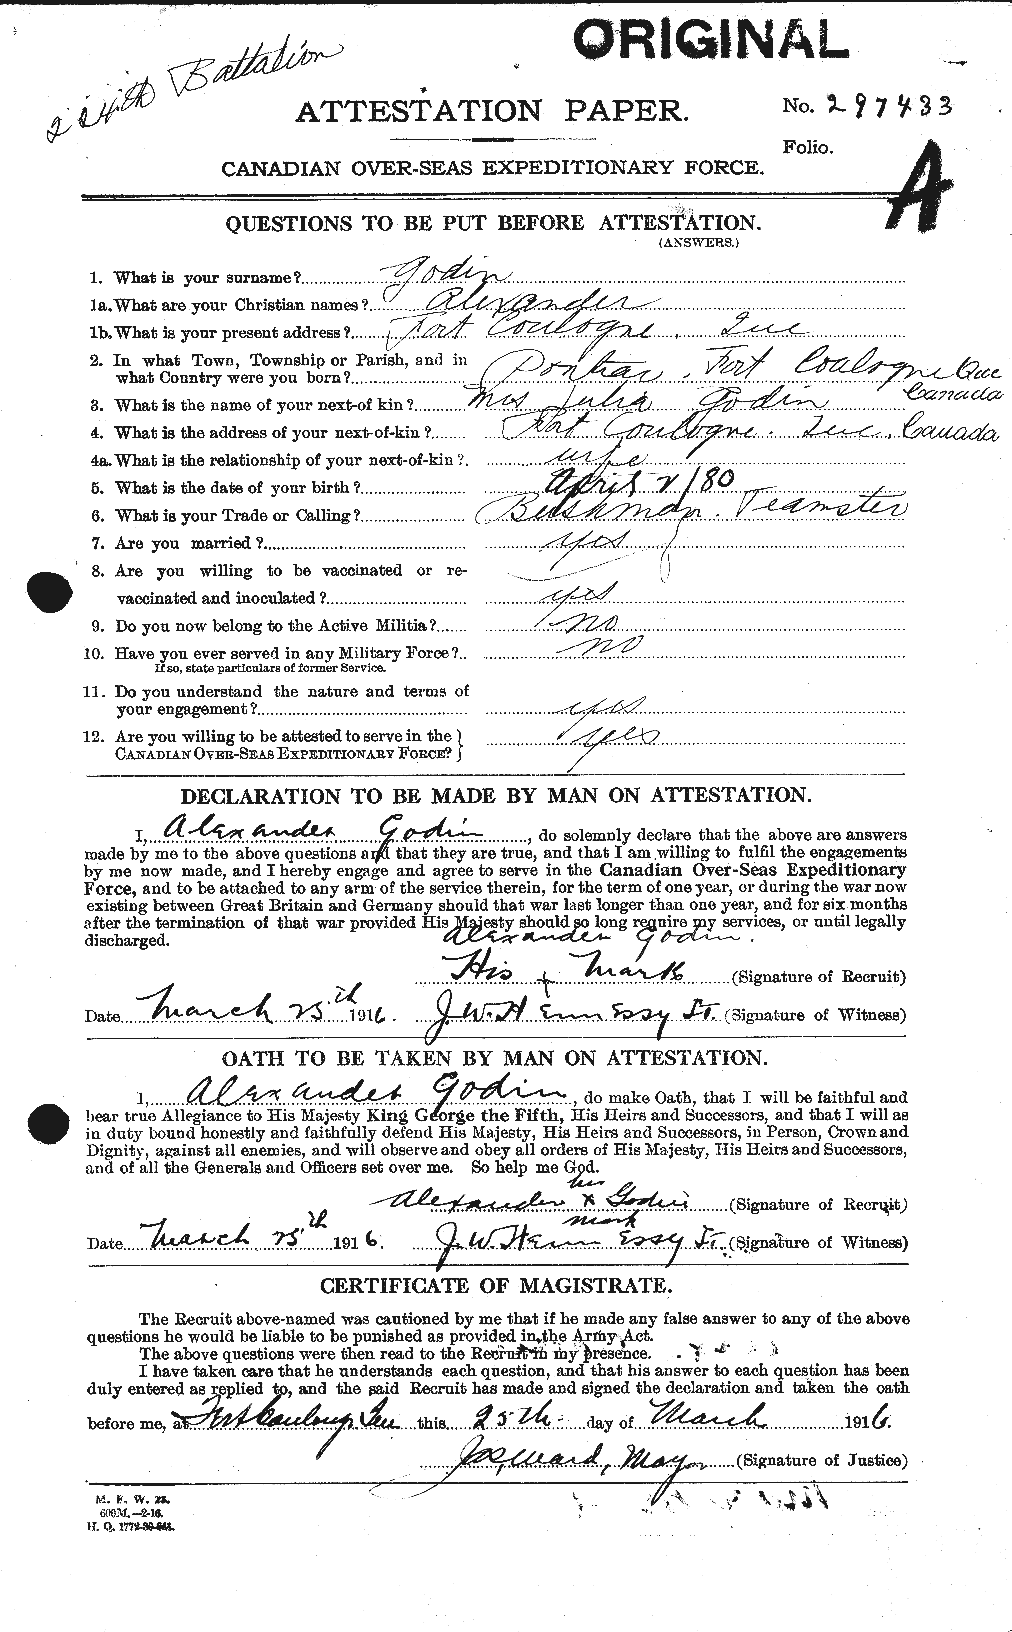 Personnel Records of the First World War - CEF 354487a